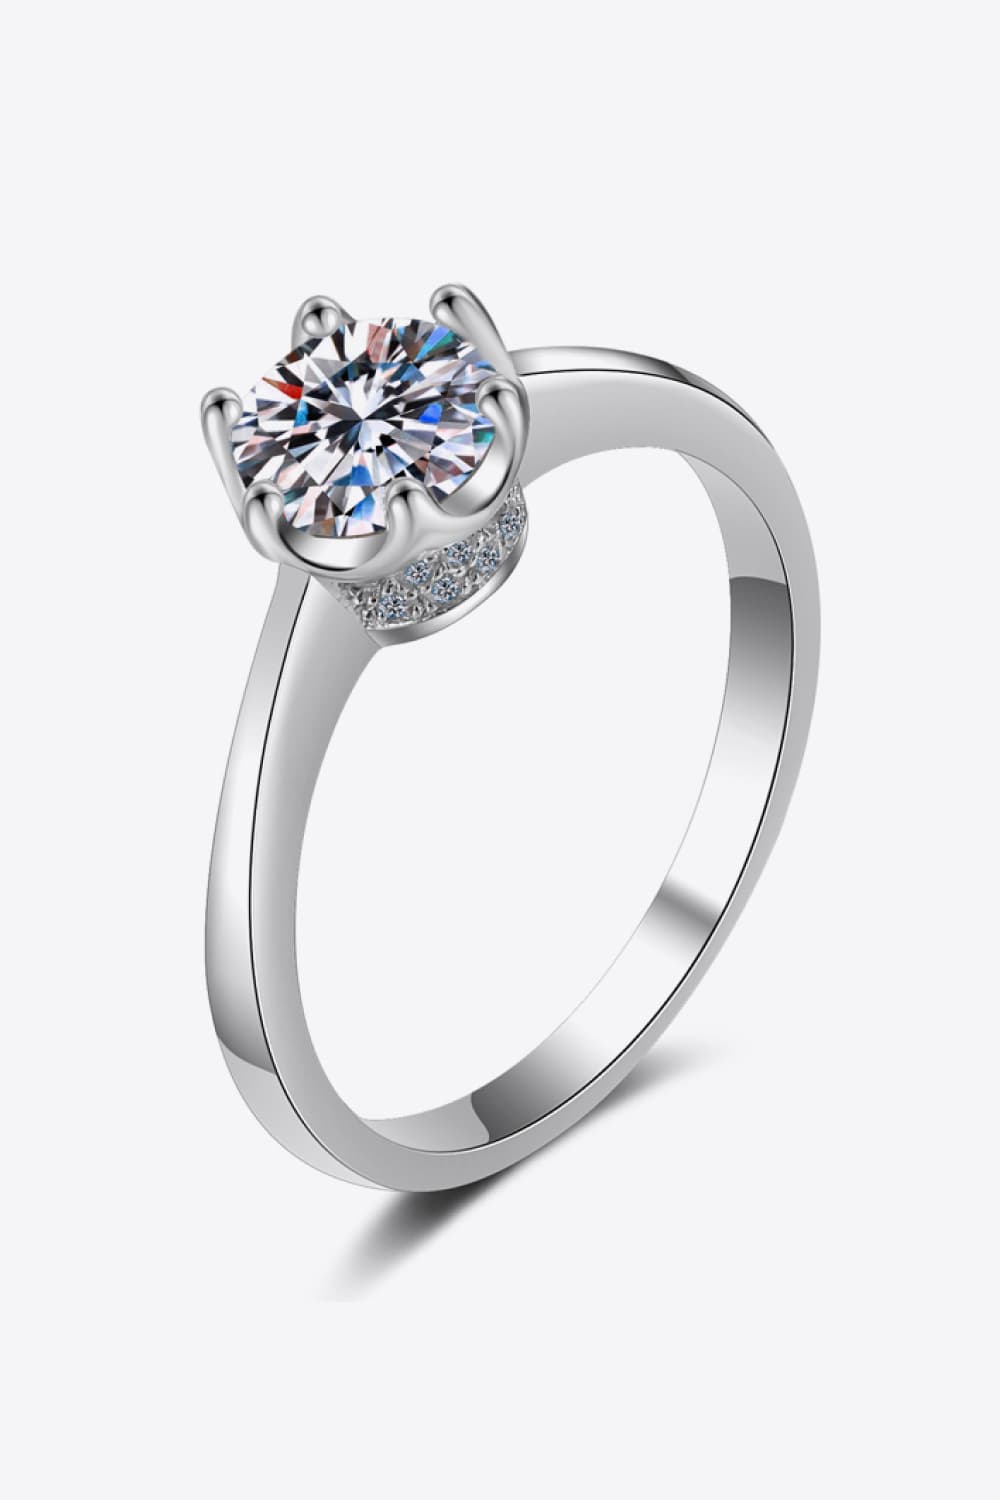 1 Carat Moissanite Rhodium-Plated Solitaire Ring - Rings - FITGGINS